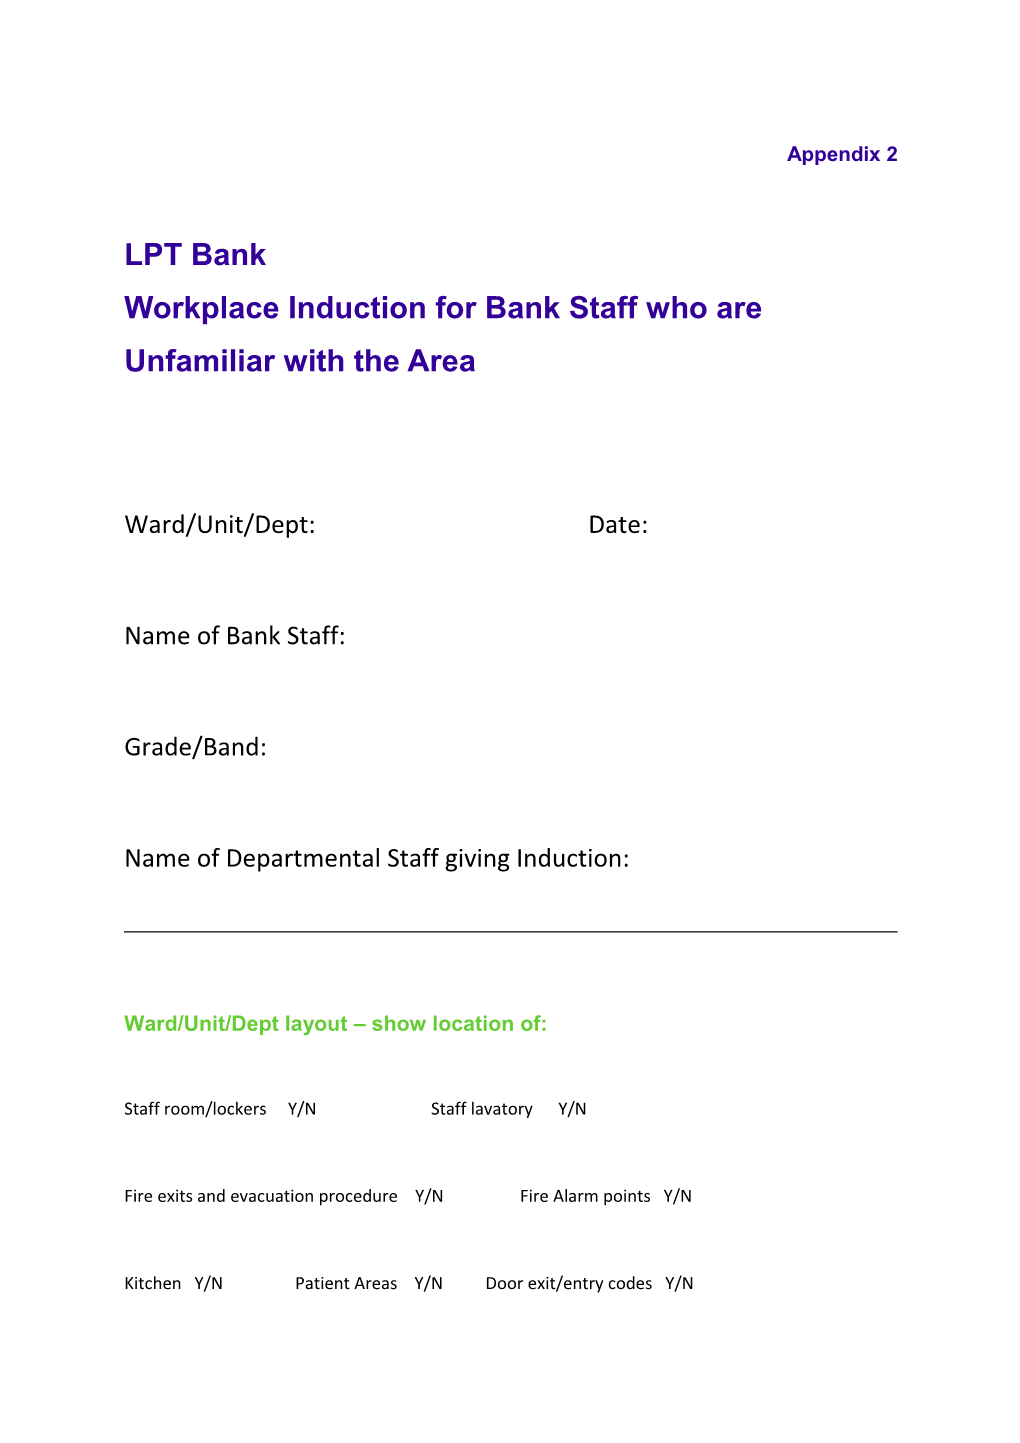 Workplace Induction for Bank Staff Who Are